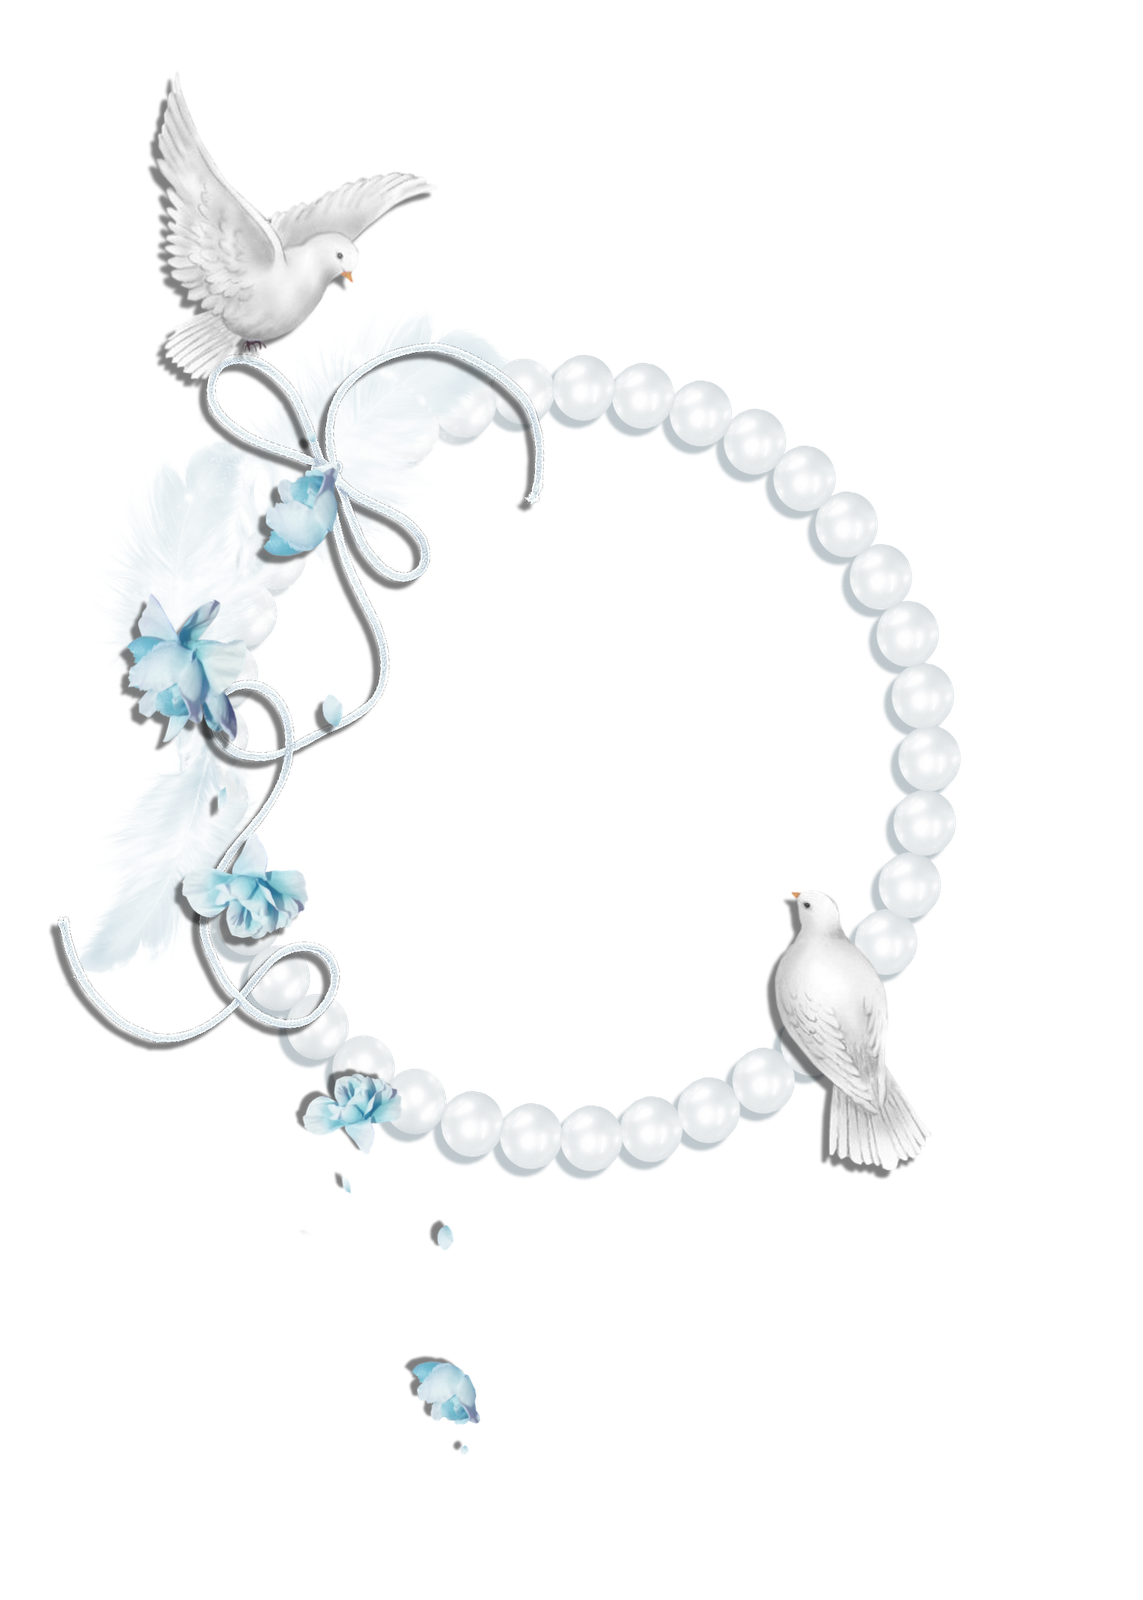 Pearl clipart pearl bracelet. White round transpare frame